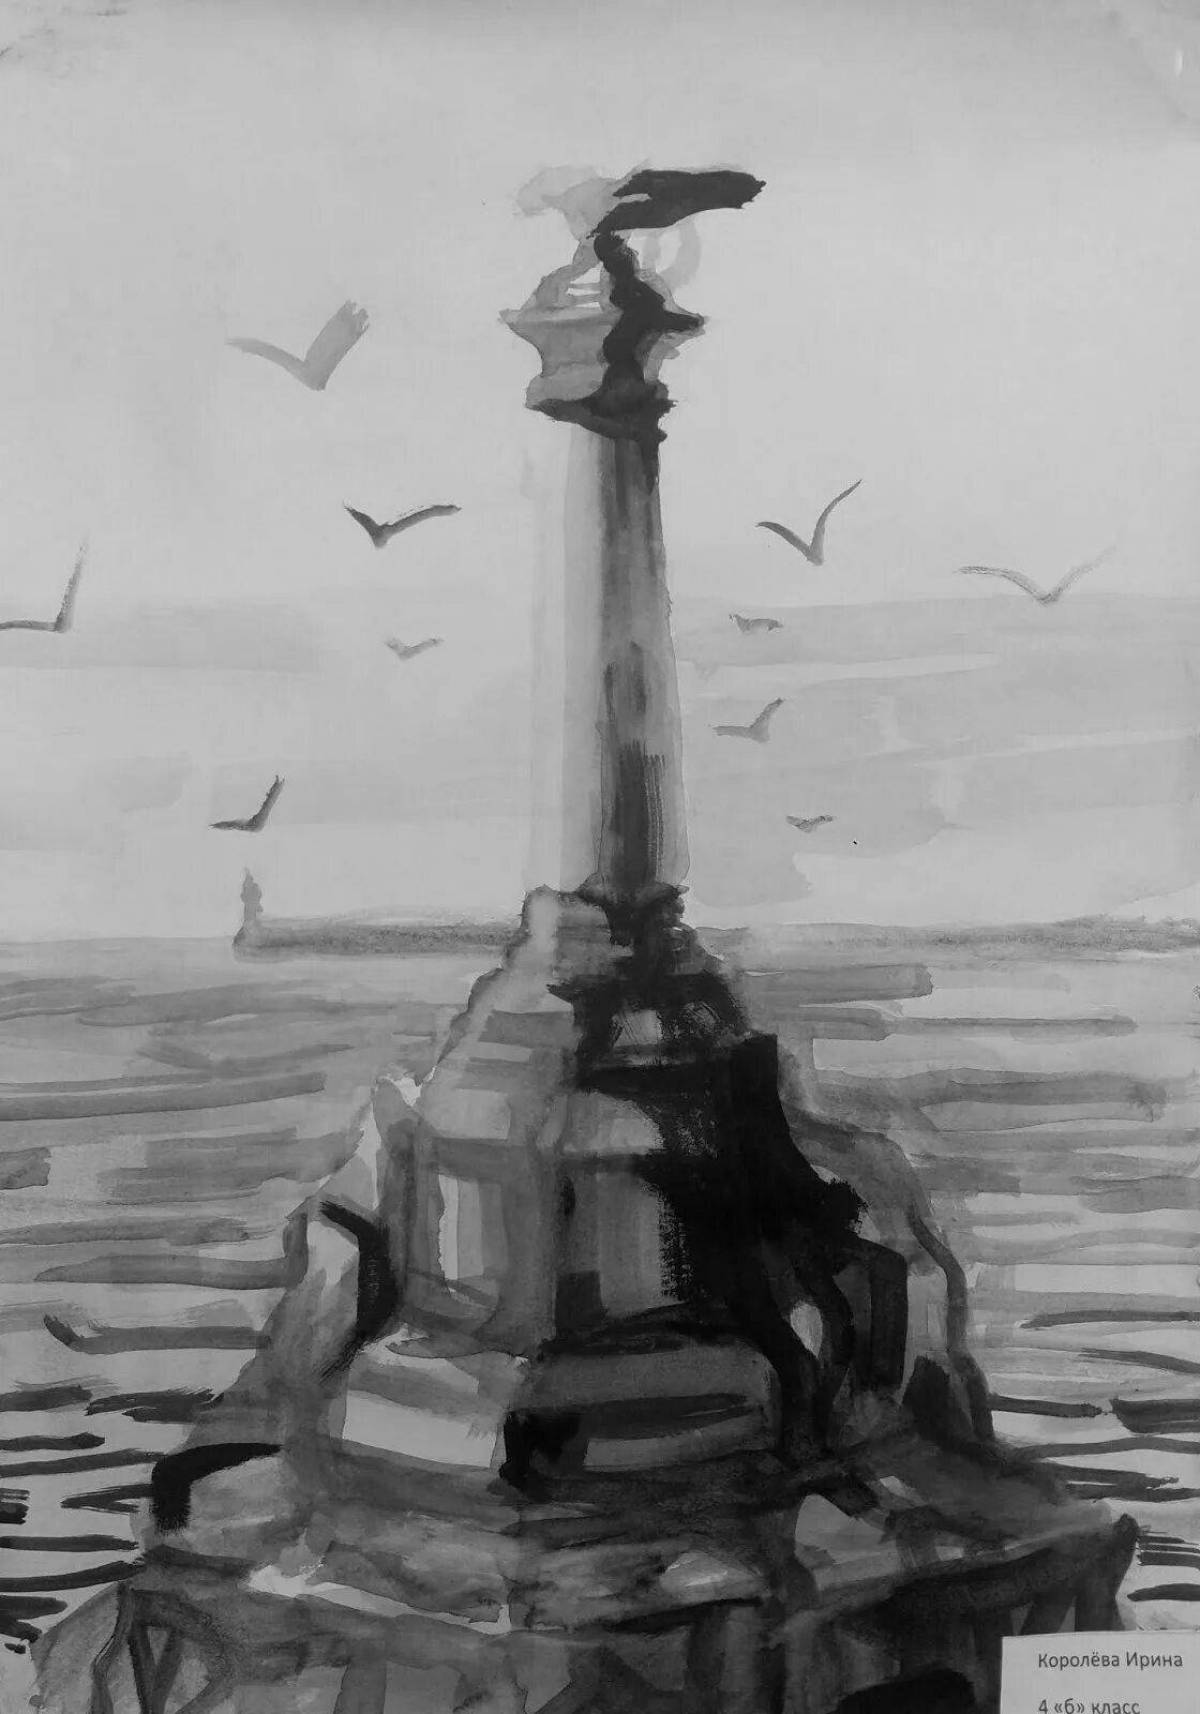 Scuttled Ships Monument #7